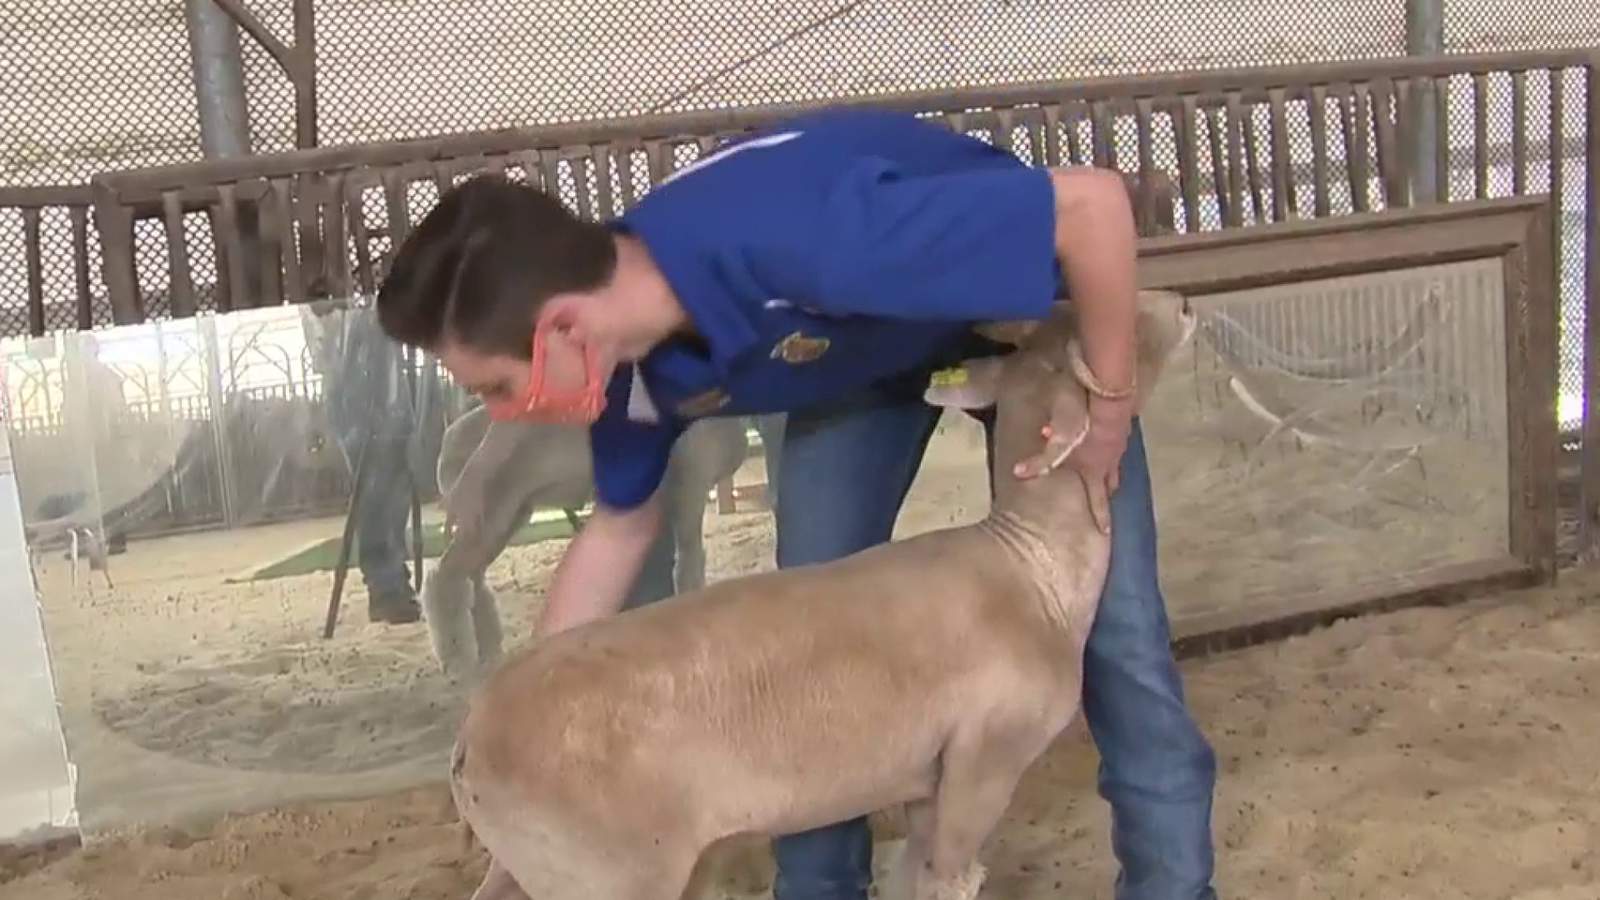 Some San Antonio students, teachers say a lot is riding on the livestock show going on as scheduled